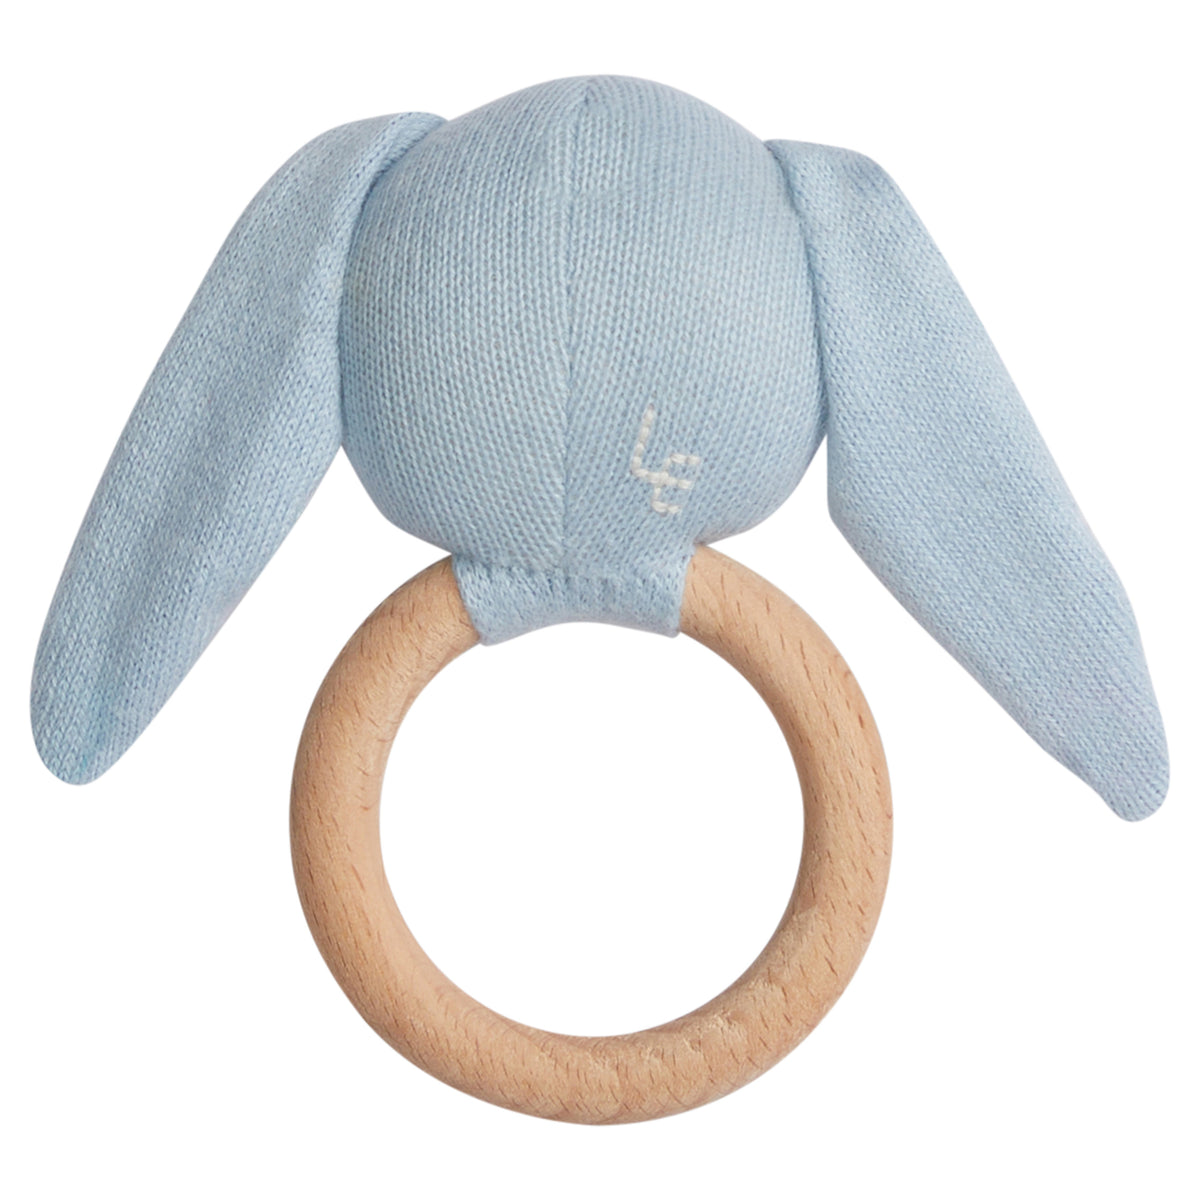 Rattle in Blue Bunny